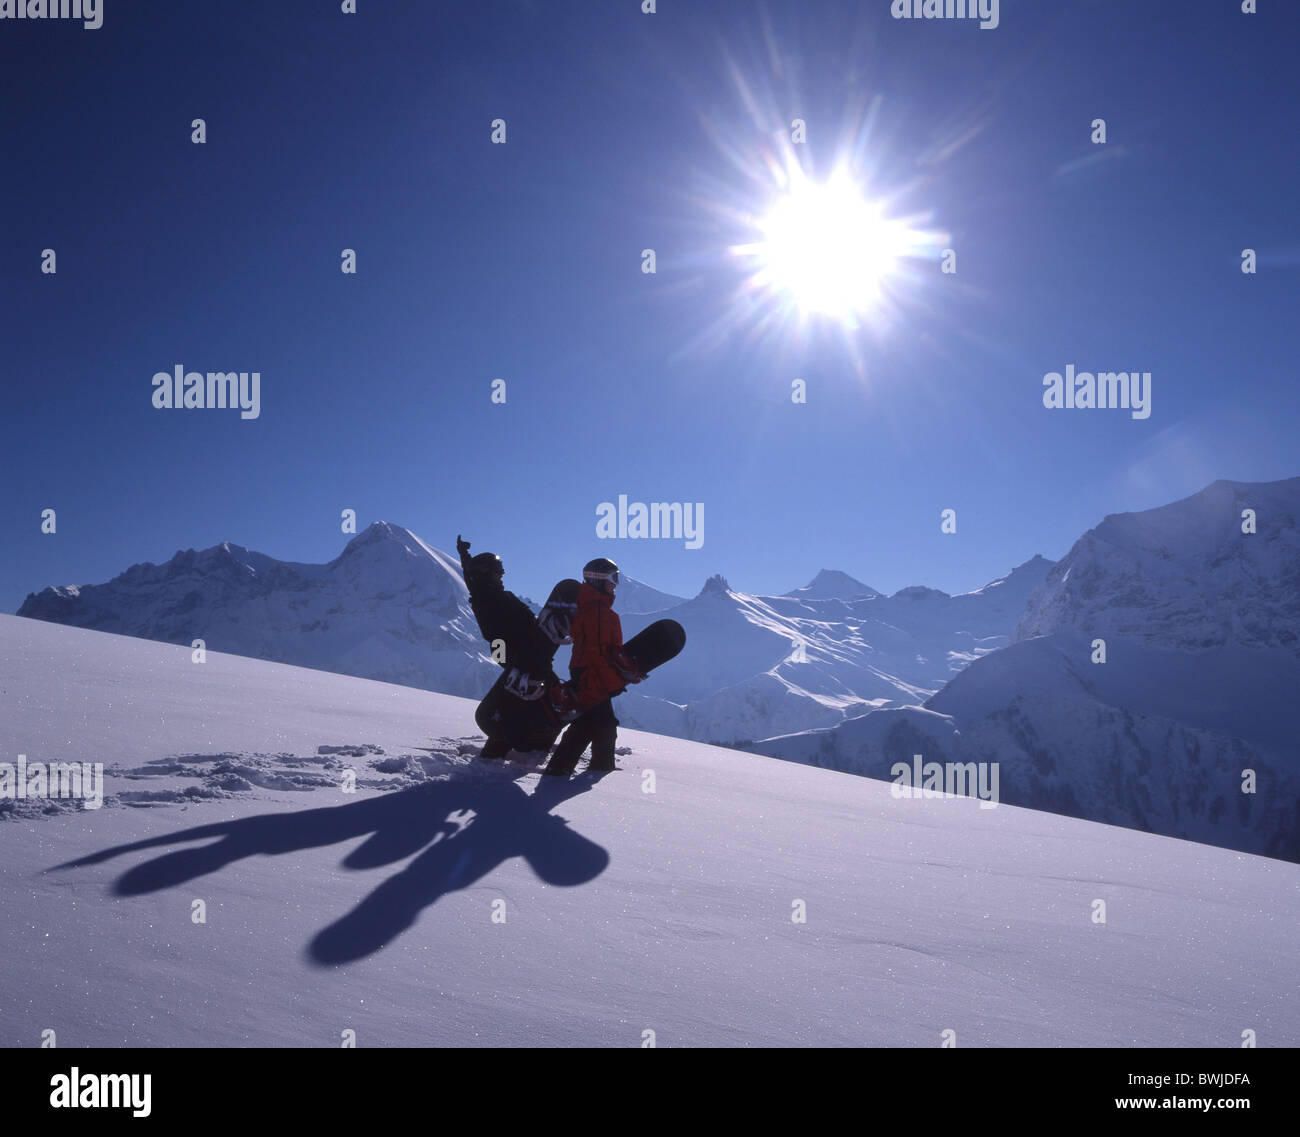 two persons Snowboarder sun cheering joy nice weather blue sky snowboard Snowboarding winter winter sports Stock Photo